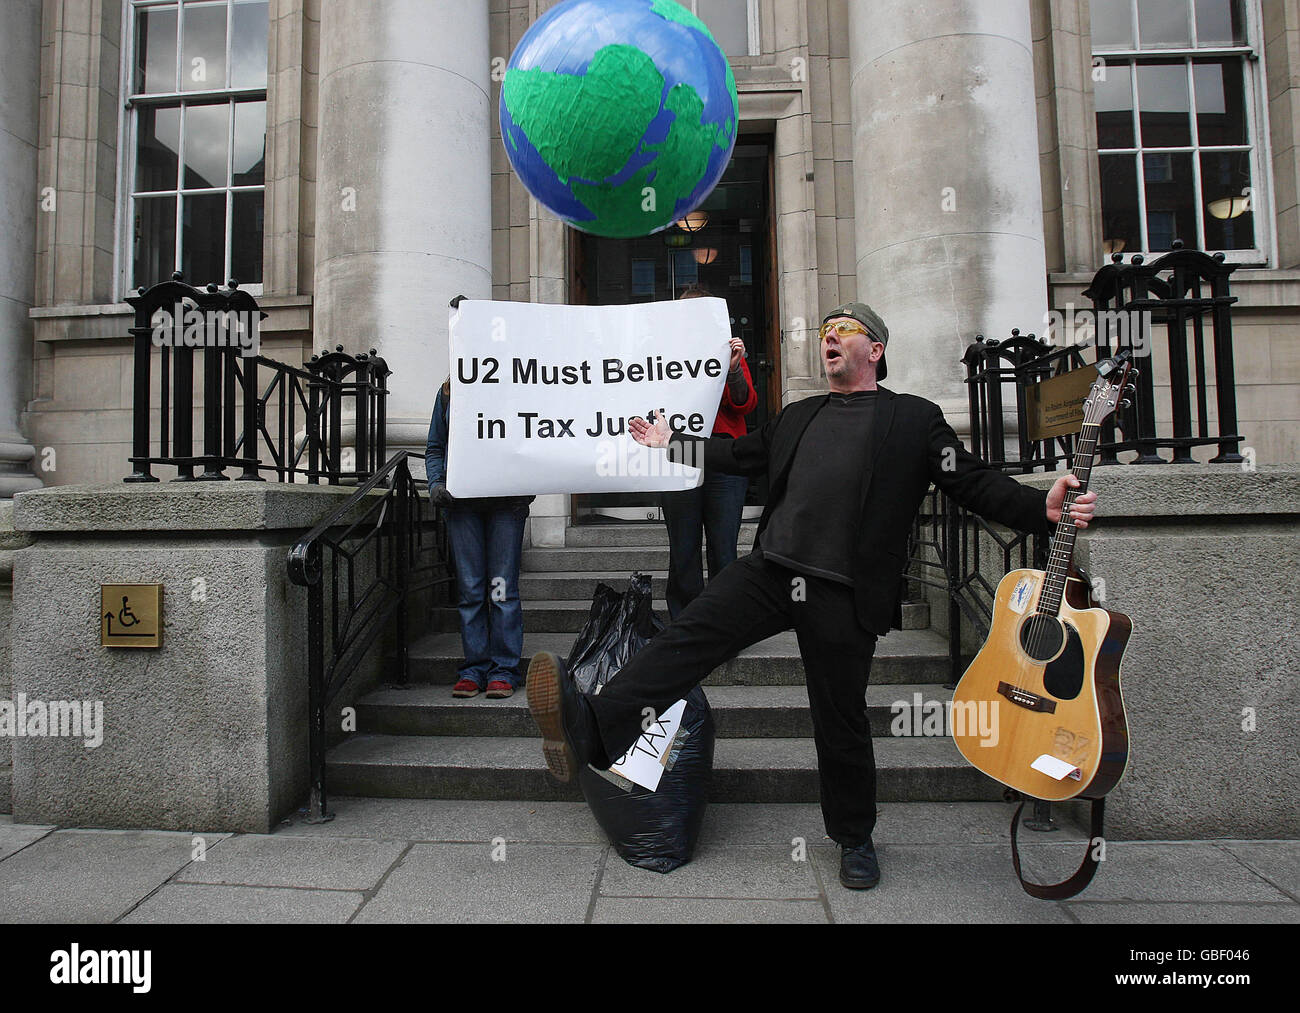 Members of the Debt and Development Coalition Ireland including Paul O'Toole (centre) dressed as Bono, the lead singer of U2, Protest outside the Department of Finance in Dublin on the eve of the launch of U2's new album 'No Line on the Horizon'. Stock Photo